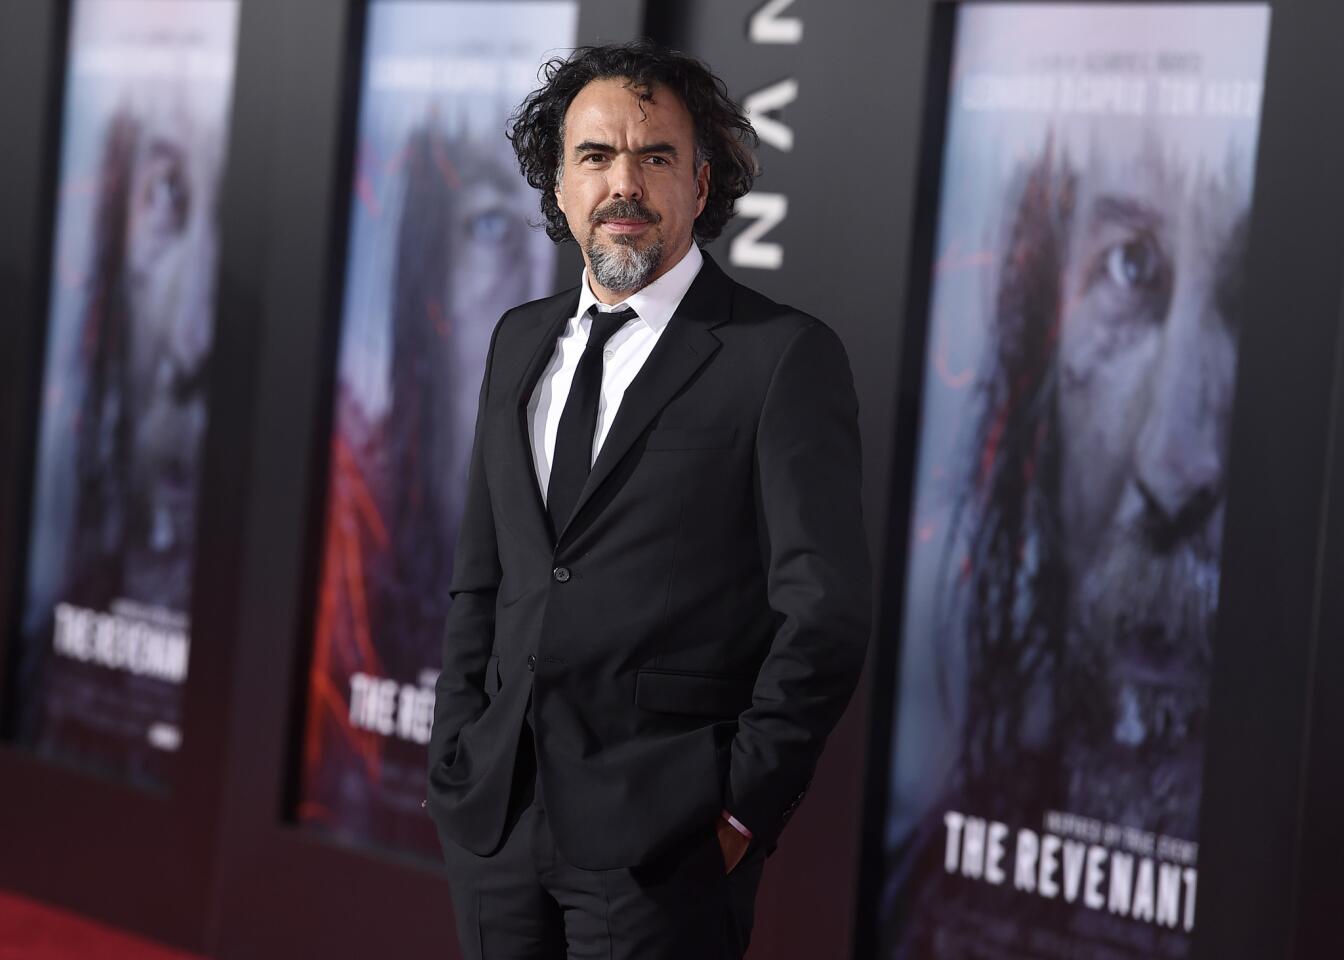 Should win: Tom McCarthy, "Spotlight" Will win: Alejandro G. Inarritu, "The Revenant" (Pictured) Skunked: Ridley Scott, "The Martian"; Ryan Cooger, "Creed"; Todd Haynes, "Carol"; Marielle Heller, "The Diary of a Teenage Girl"; Sean Baker, "Tangerine"; Laszlo Nemes, "Son of Saul"